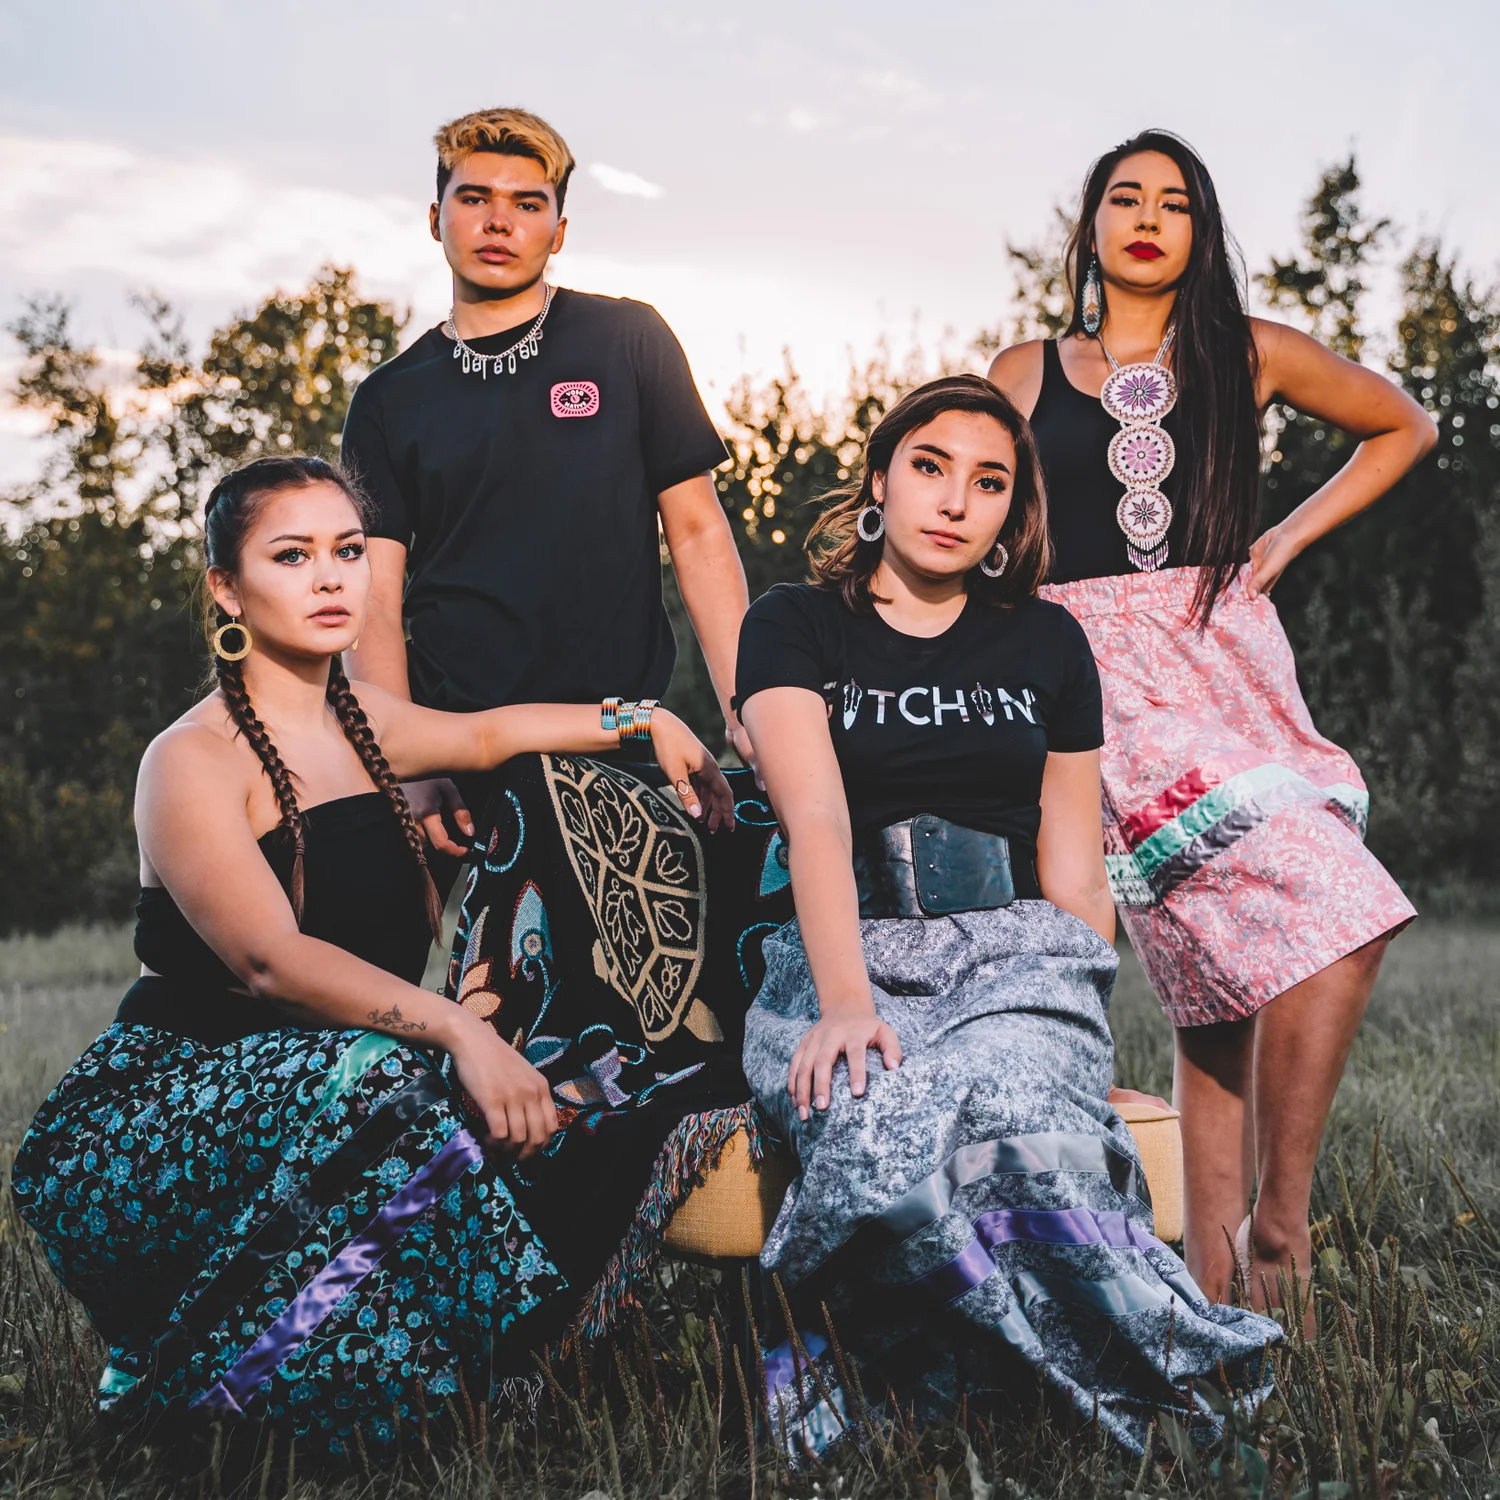 Beyond Buckskin brand image: Four young people sit together in the grass with the sun setting in the background.